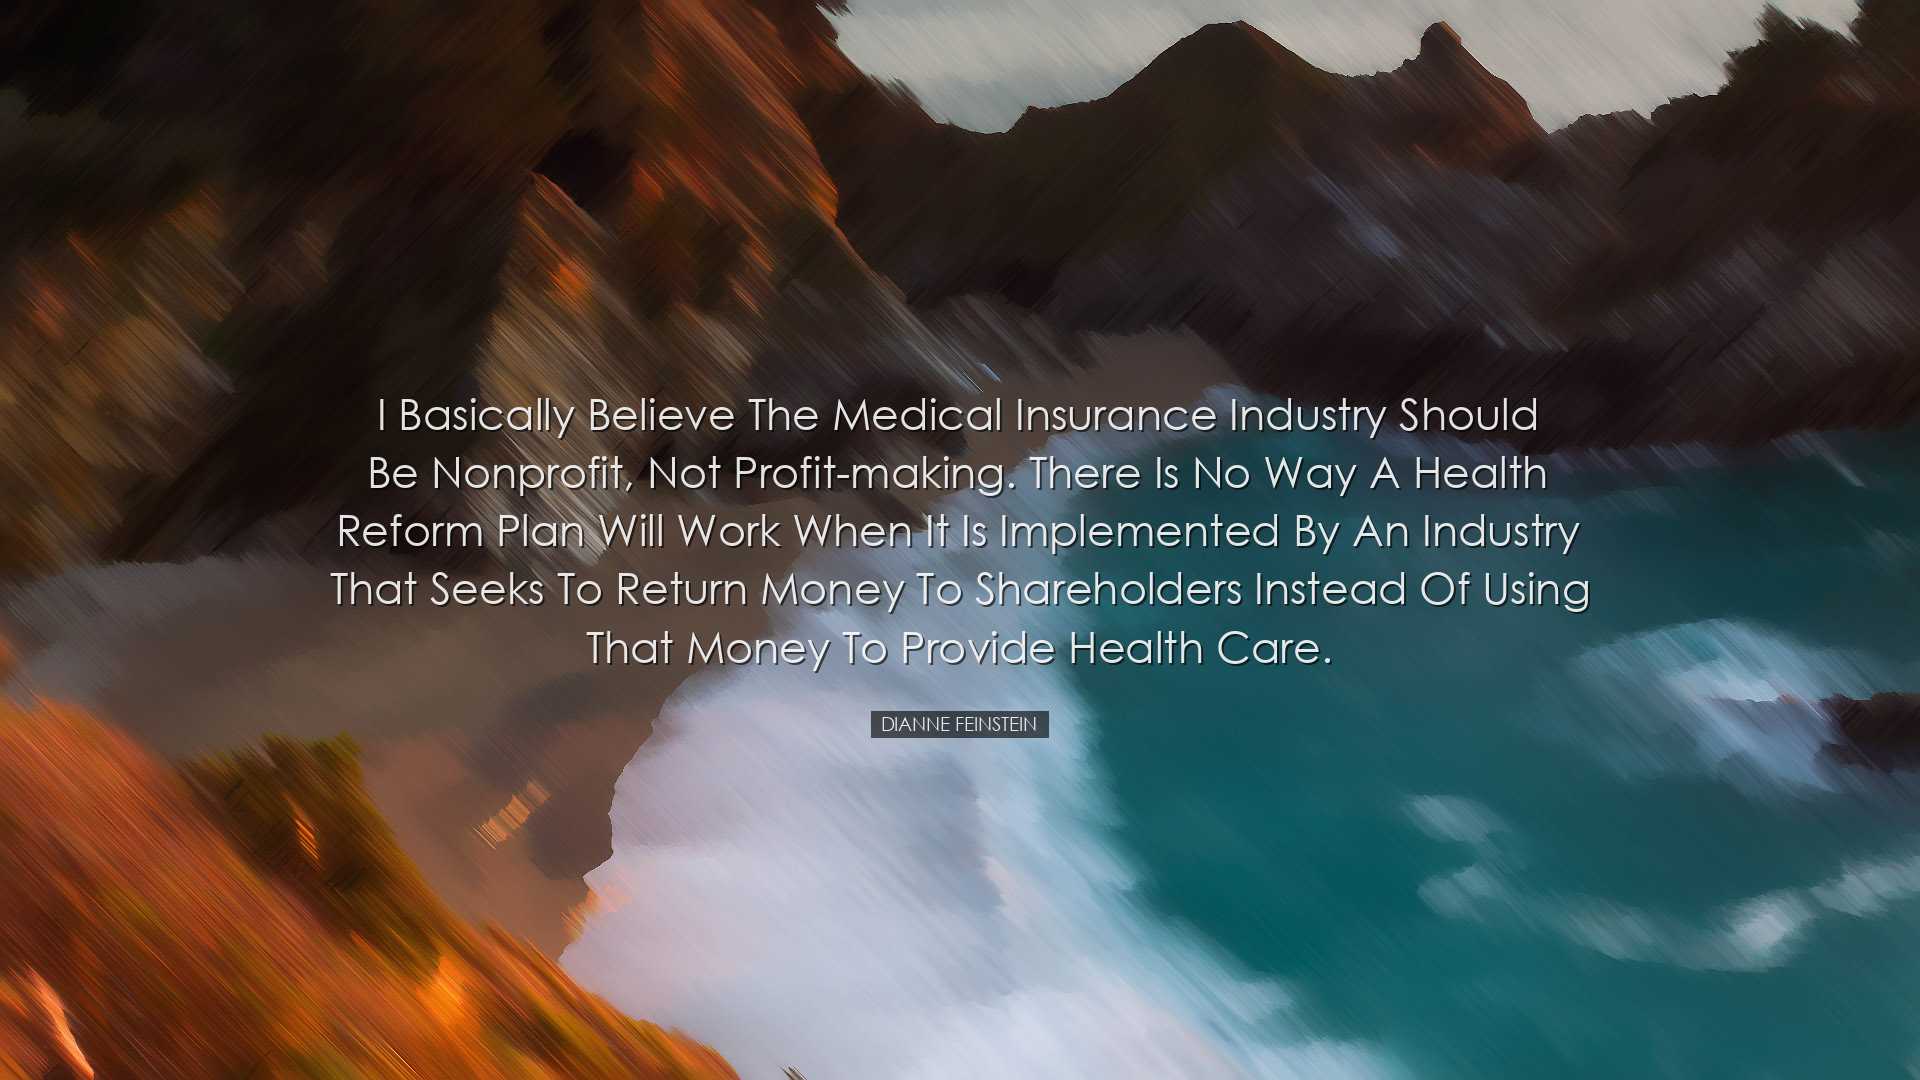 I basically believe the medical insurance industry should be nonpr